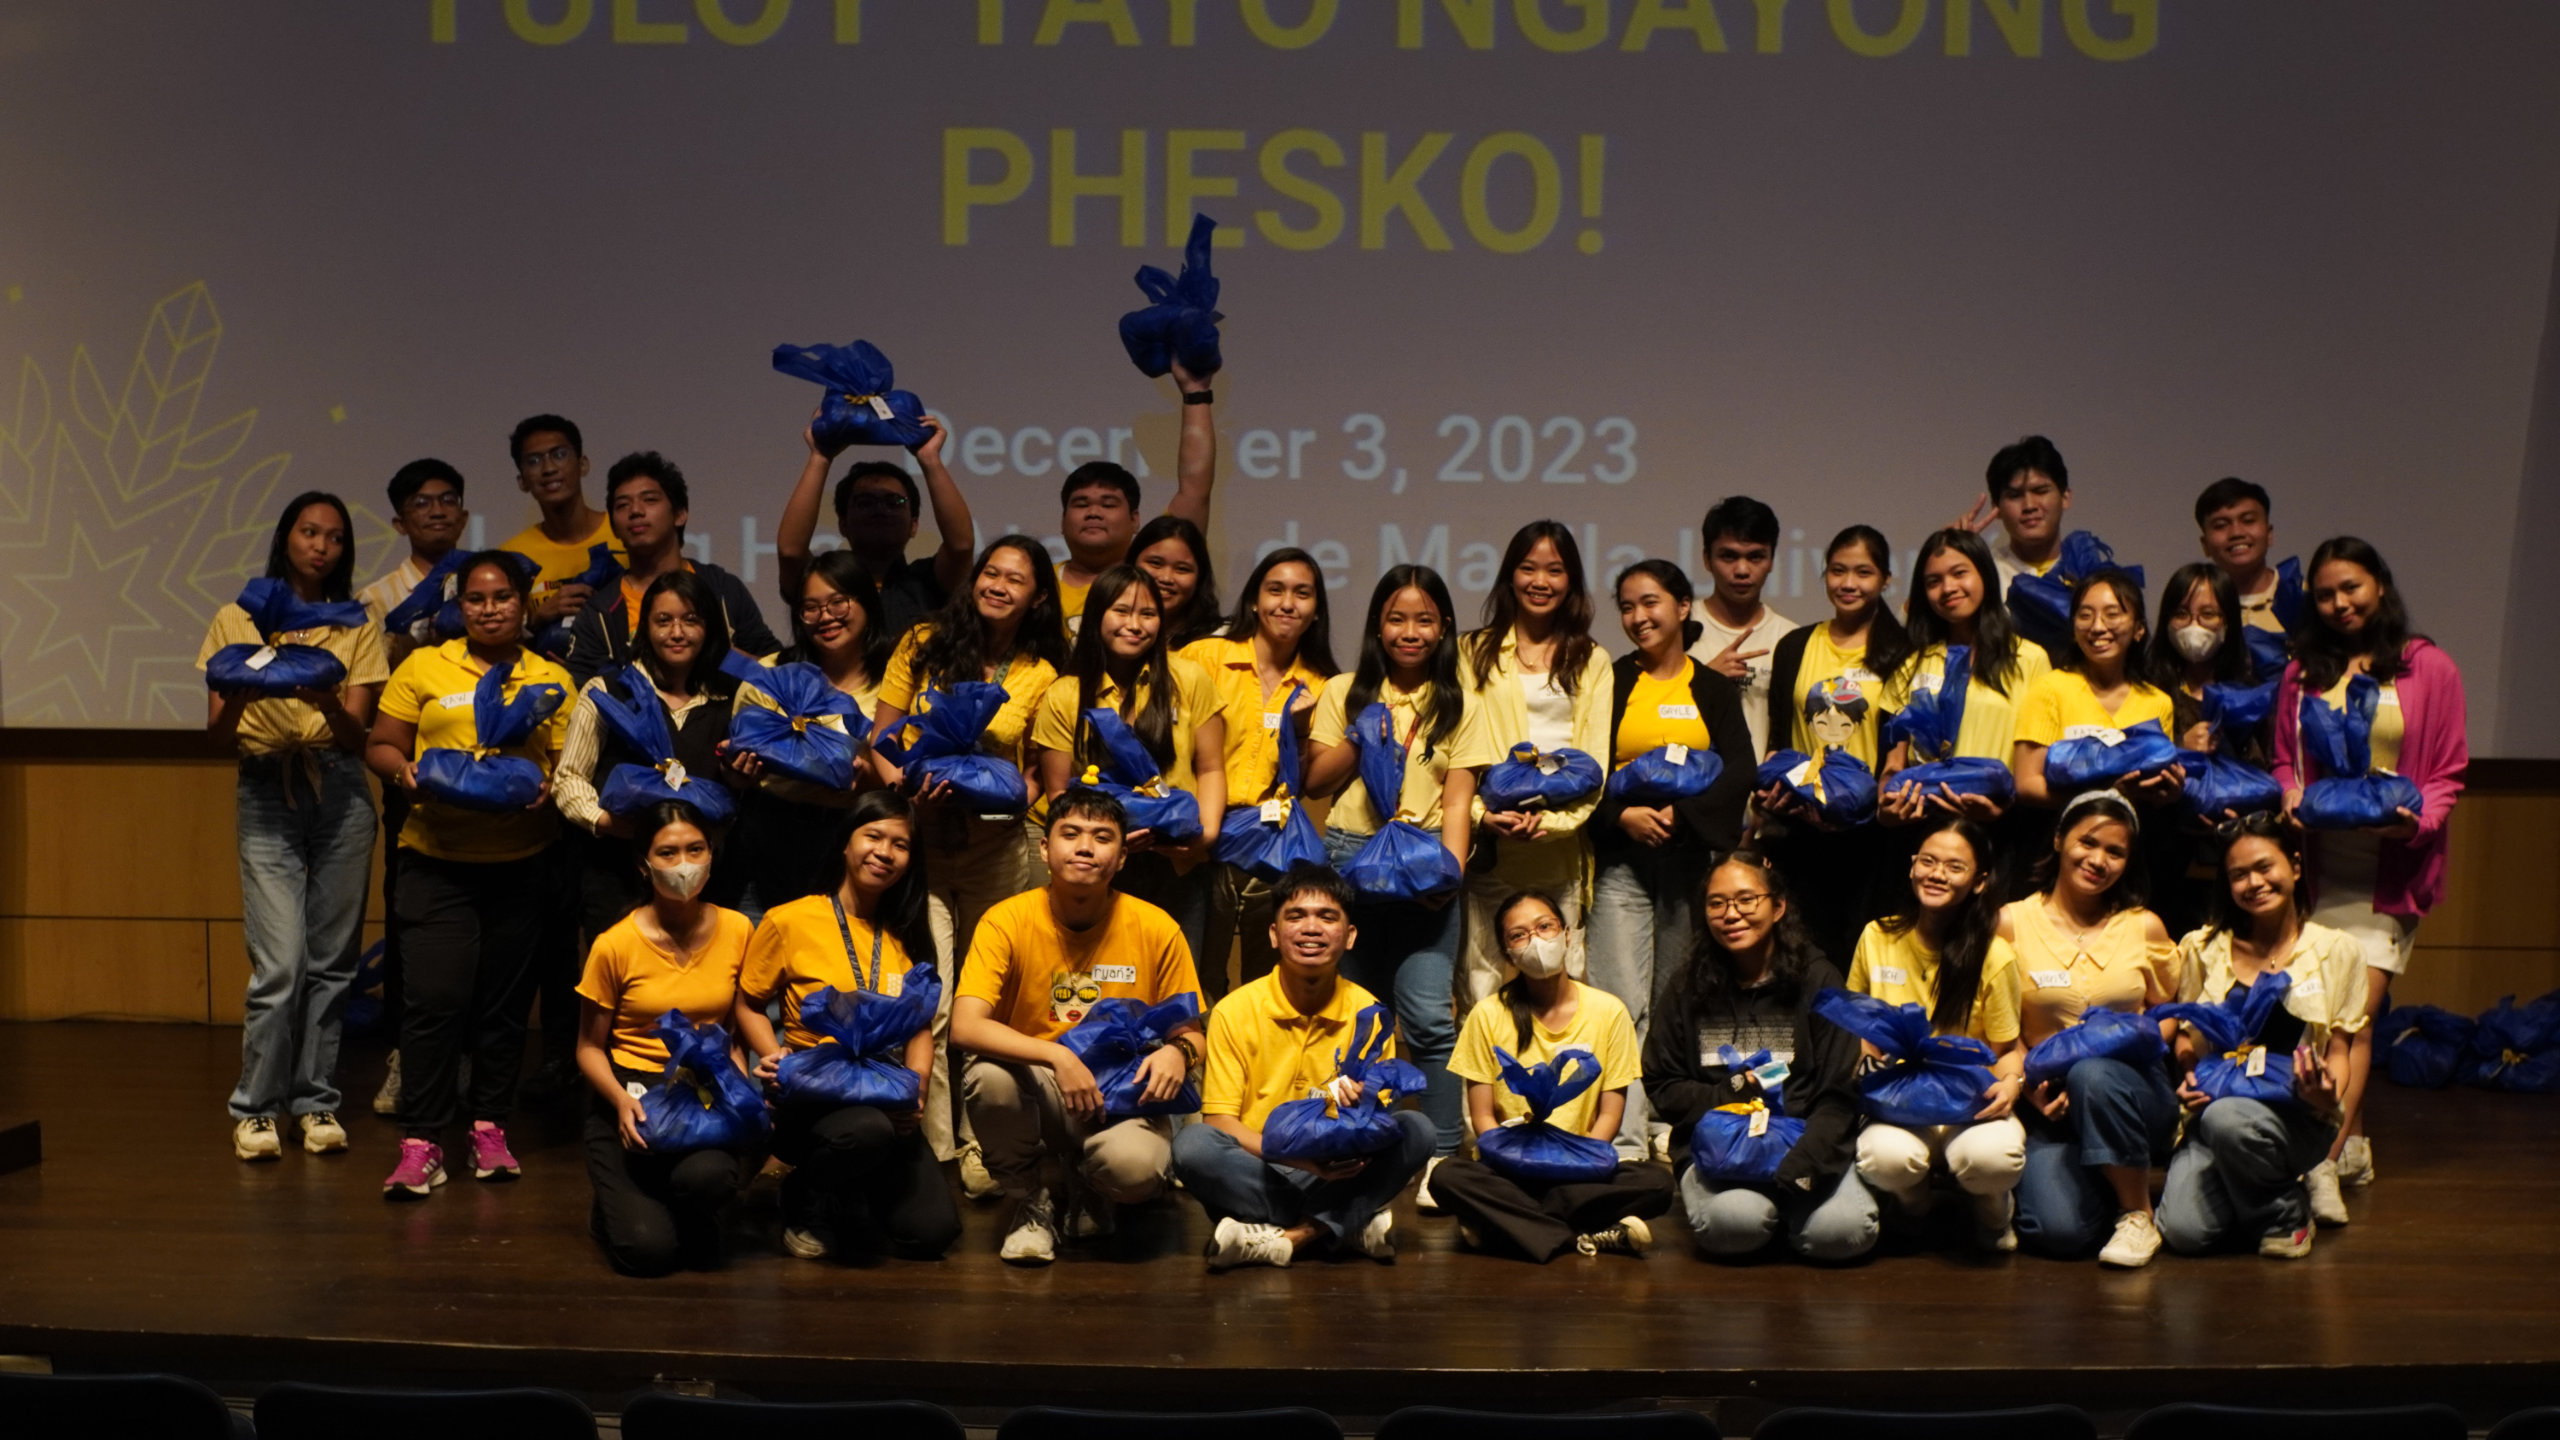 Two rows of students in yellow stand on the stage holding blue fabric bags of groceries.